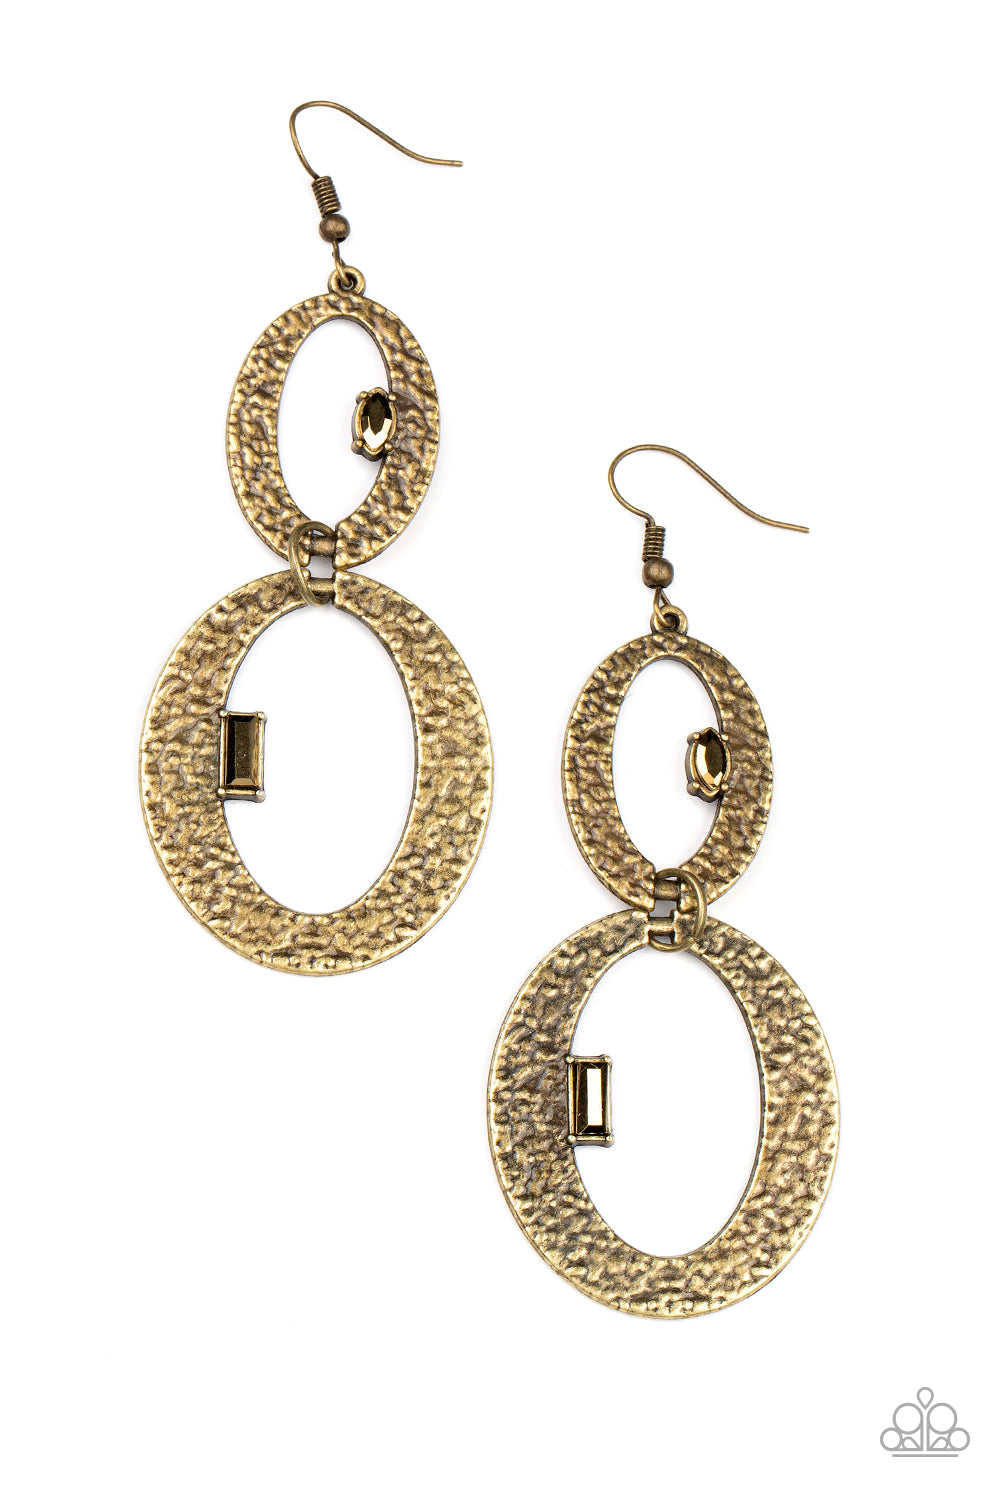 OVAL and OVAL Again - Brass earrings